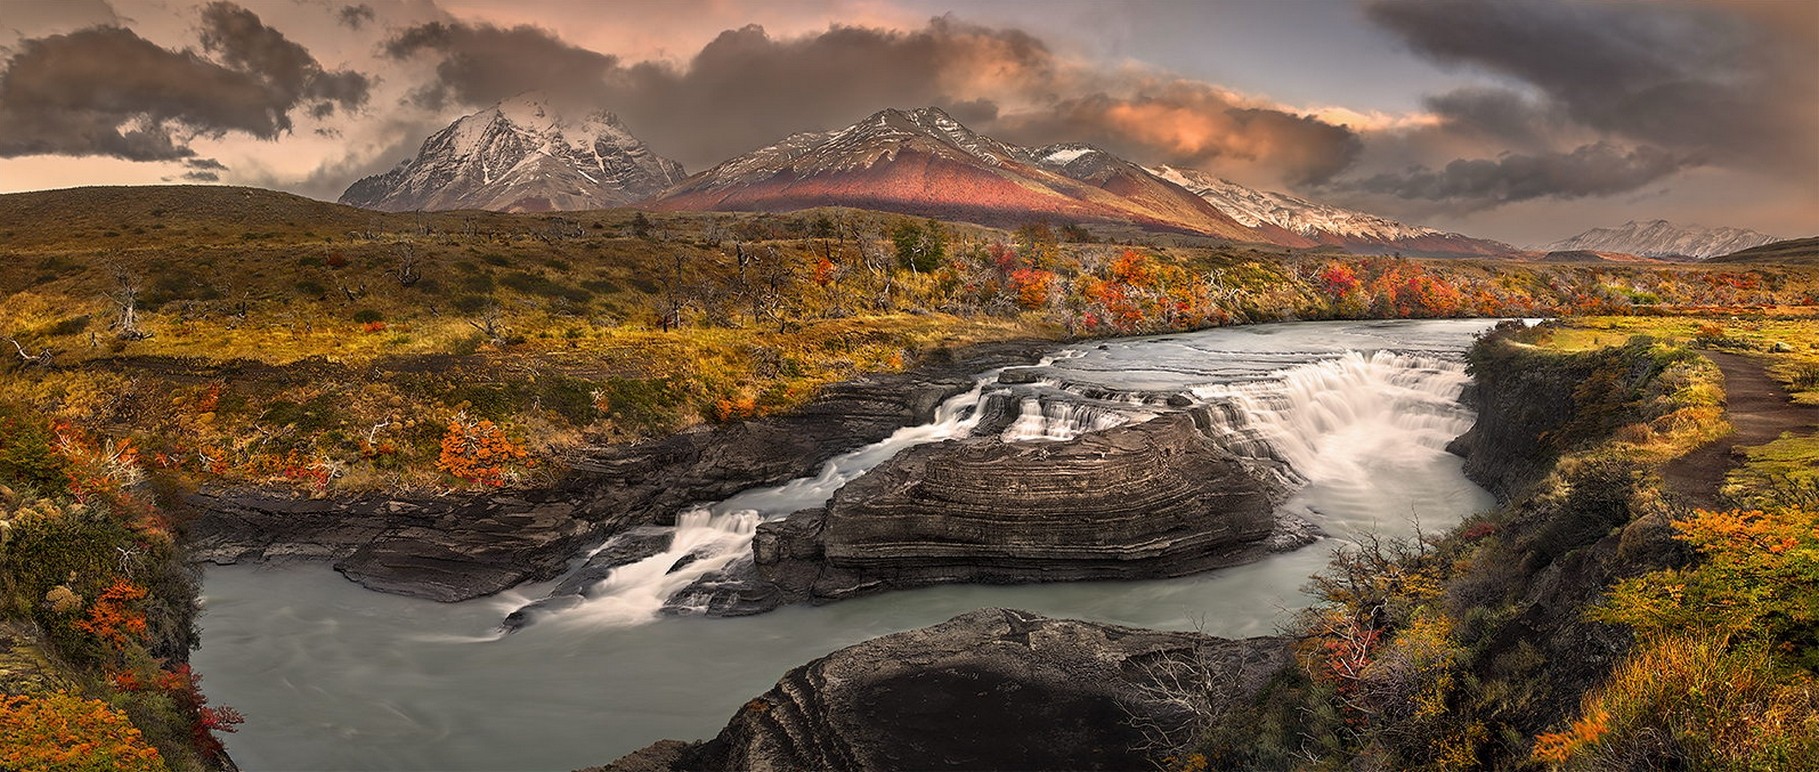 Landscape Nature Panoramas River Rapids Grass Shrubs Mountains Clouds Fall Snowy Peak Patagonia Chil 1819x772